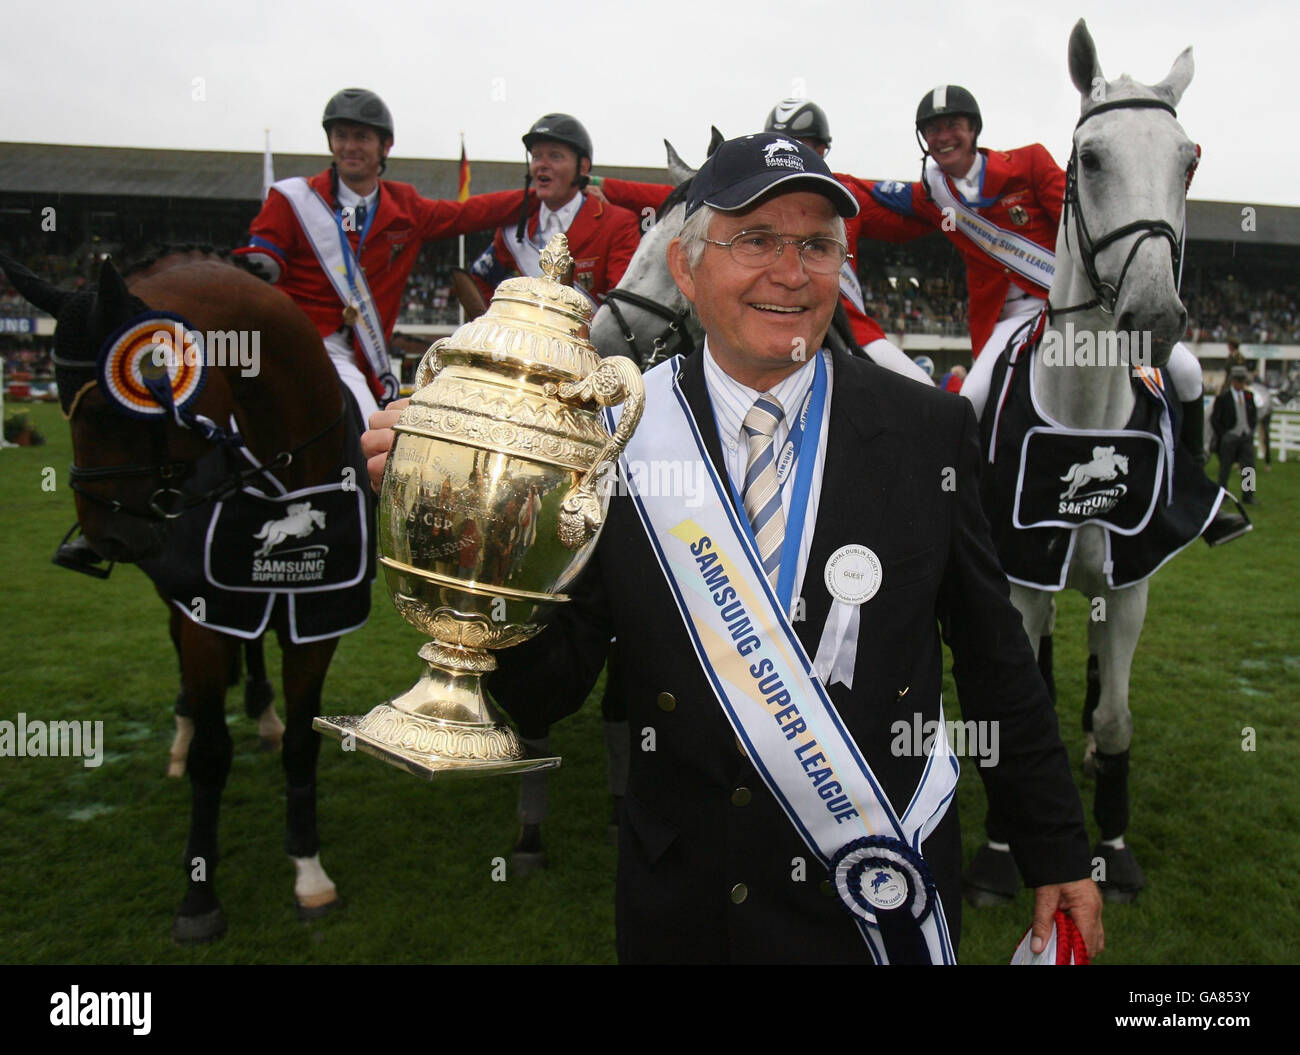 Germany's Chef d'Equipe Sonke Sonksen (front) and team (left to right) Thomas Muhlbauer, Engemann Hermann, Holger Wulschner and Thomas Voss hold up the Aga Khan Challenge trophy at the Dublin Horse Show at the RDS, Dublin. Stock Photo